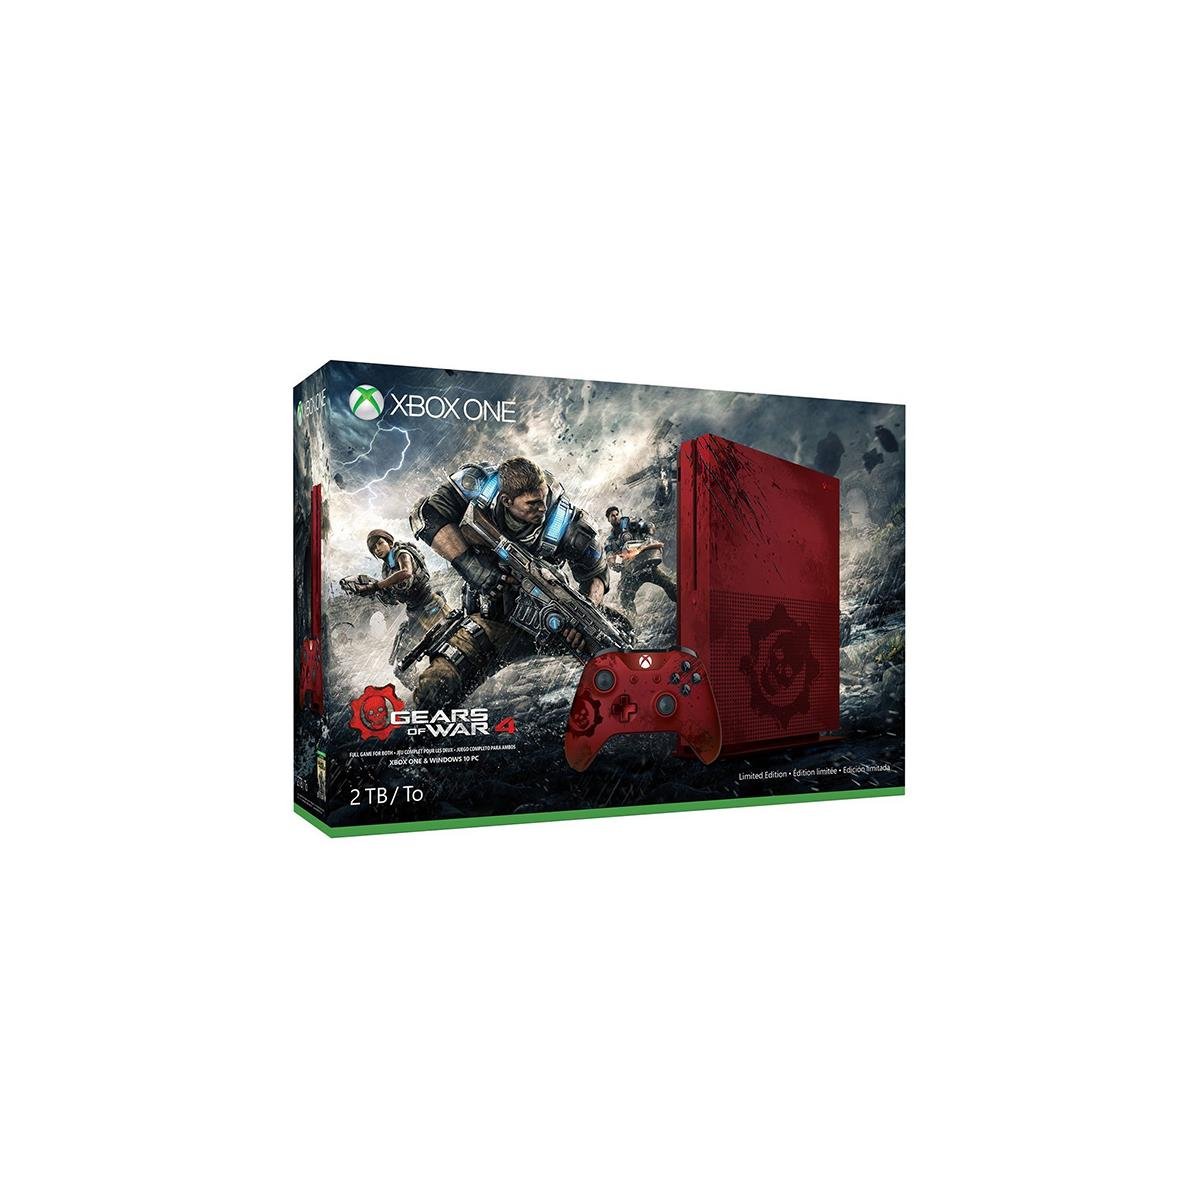 Xbox One S Gears of War 4 Limited Edition 2TB Bundle launching in